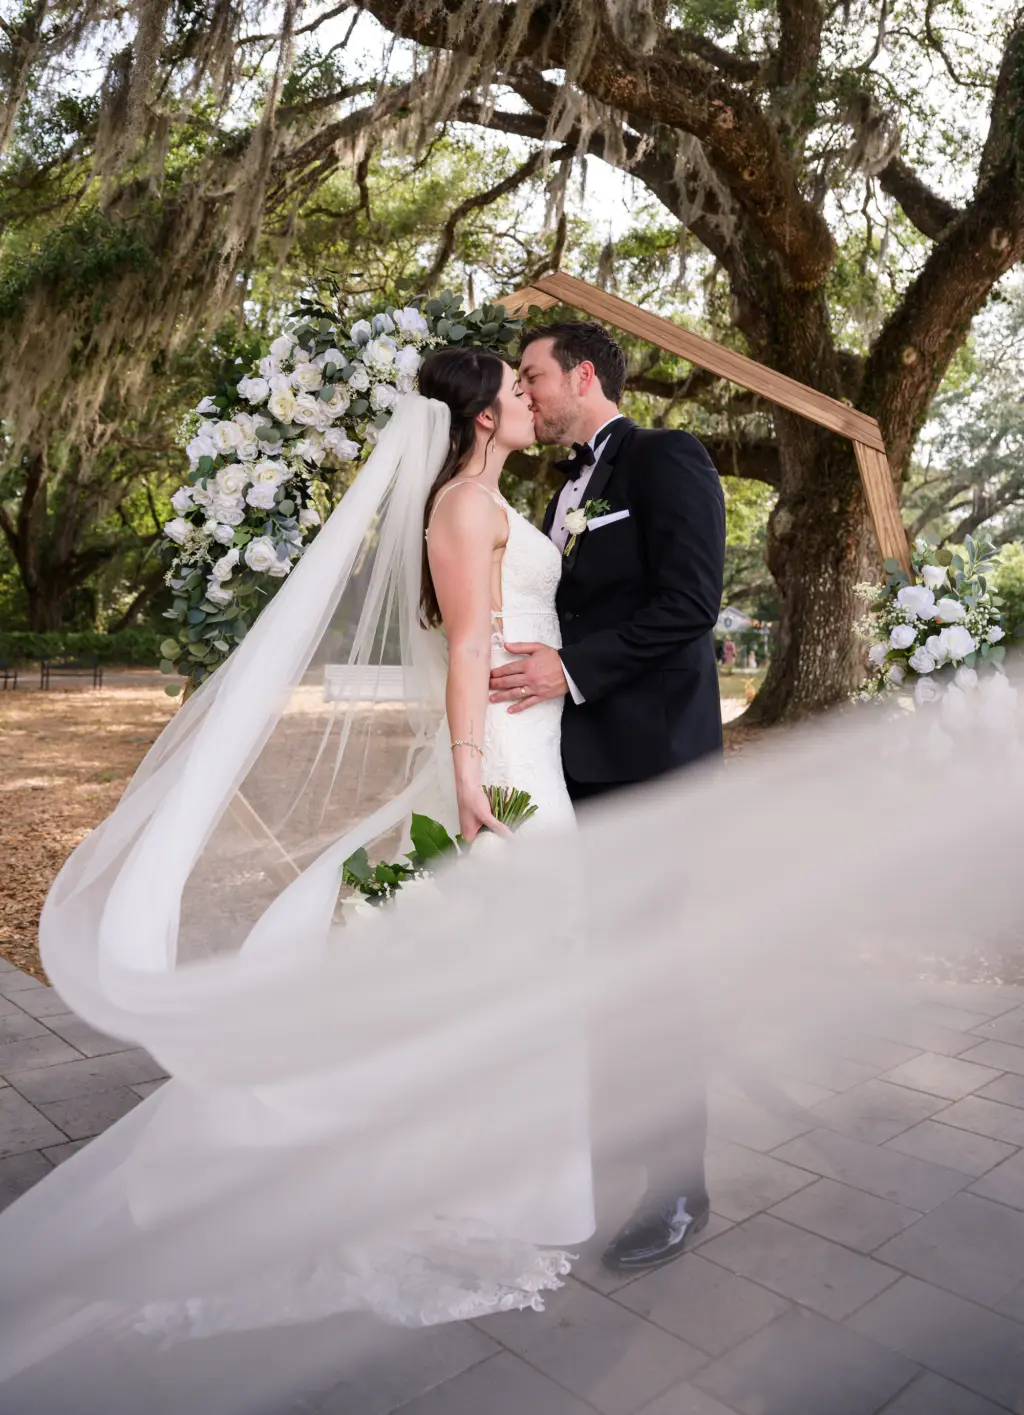 Bride and Groom First Kiss Wedding Portrait | Wedding Geometric Wooden Ceremony Arch | Tampa Bay Event Venue Legacy Lane Weddings